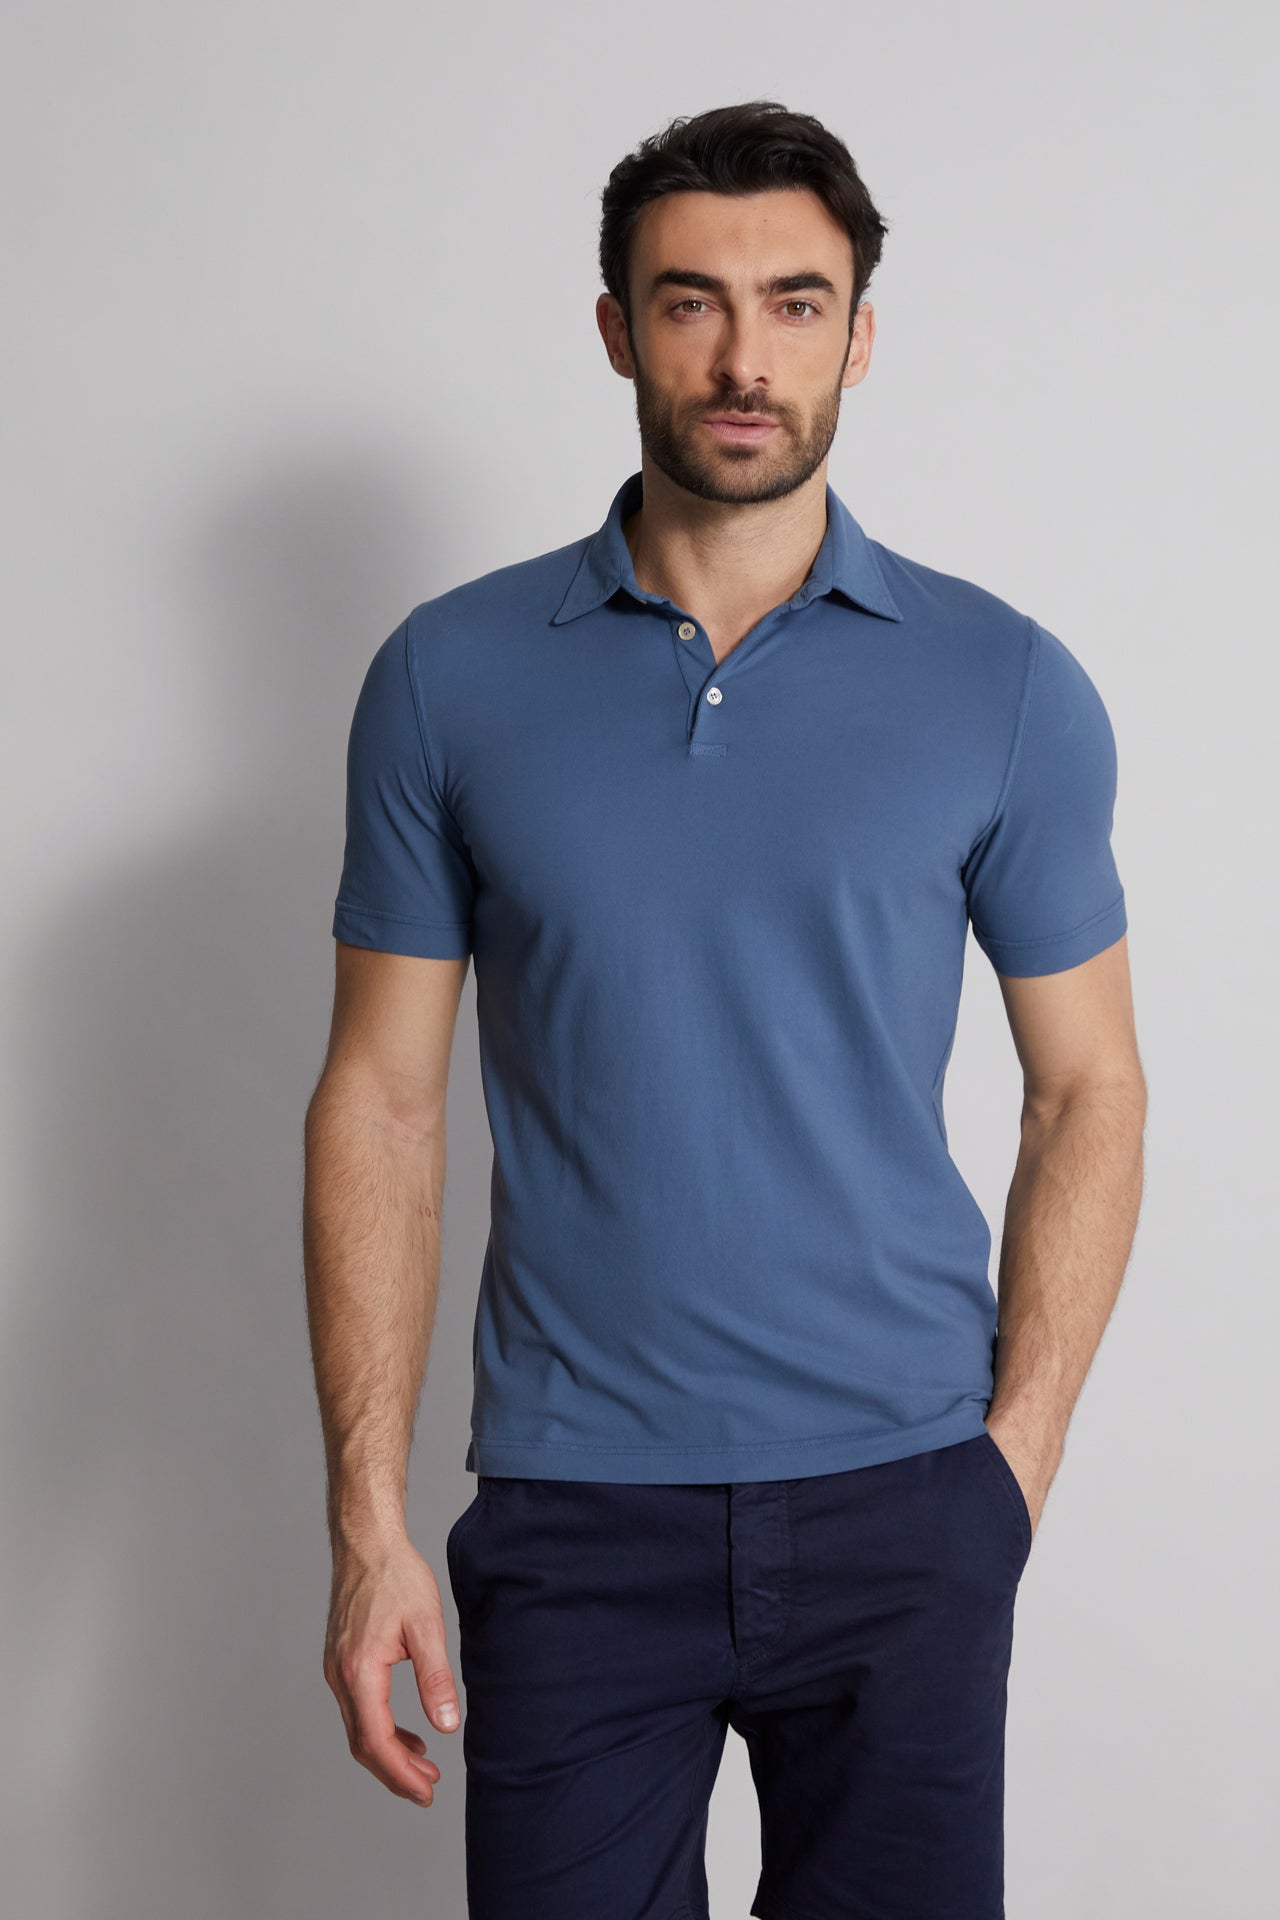 men's iconic cotton polo jersey in blue